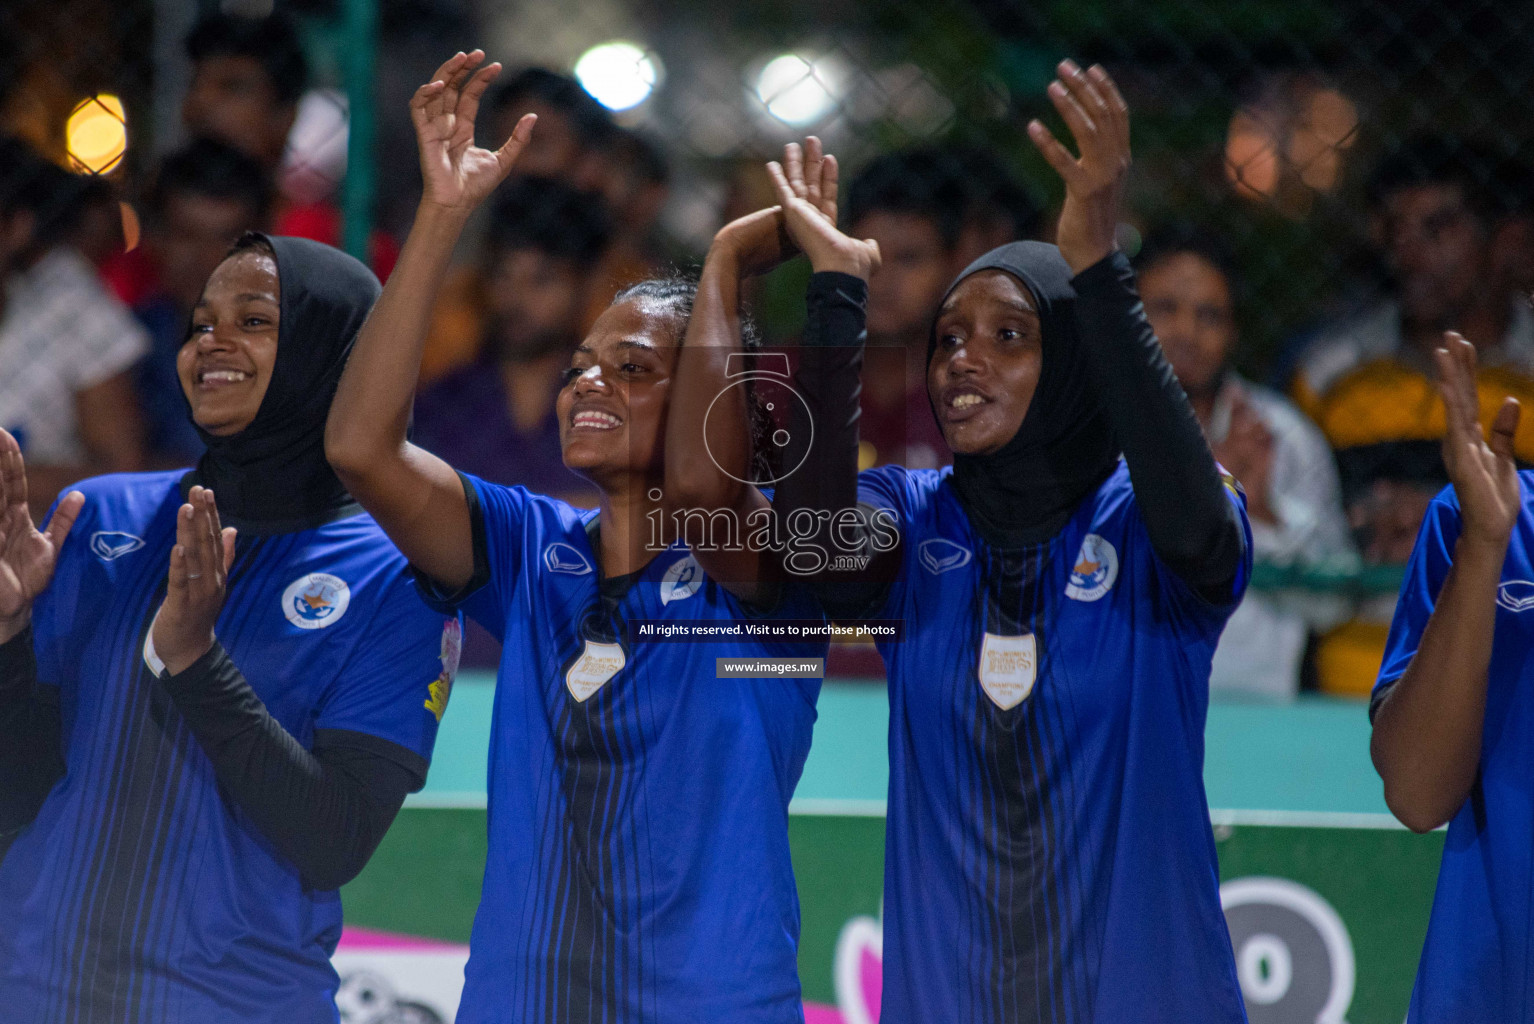 MPL vs Police Club in the finals of 18/30 Women's Futsal Fiesta 2019 on 2nd May 2019, held in Hulhumale Photos: Ismail Thoriq / images.mv